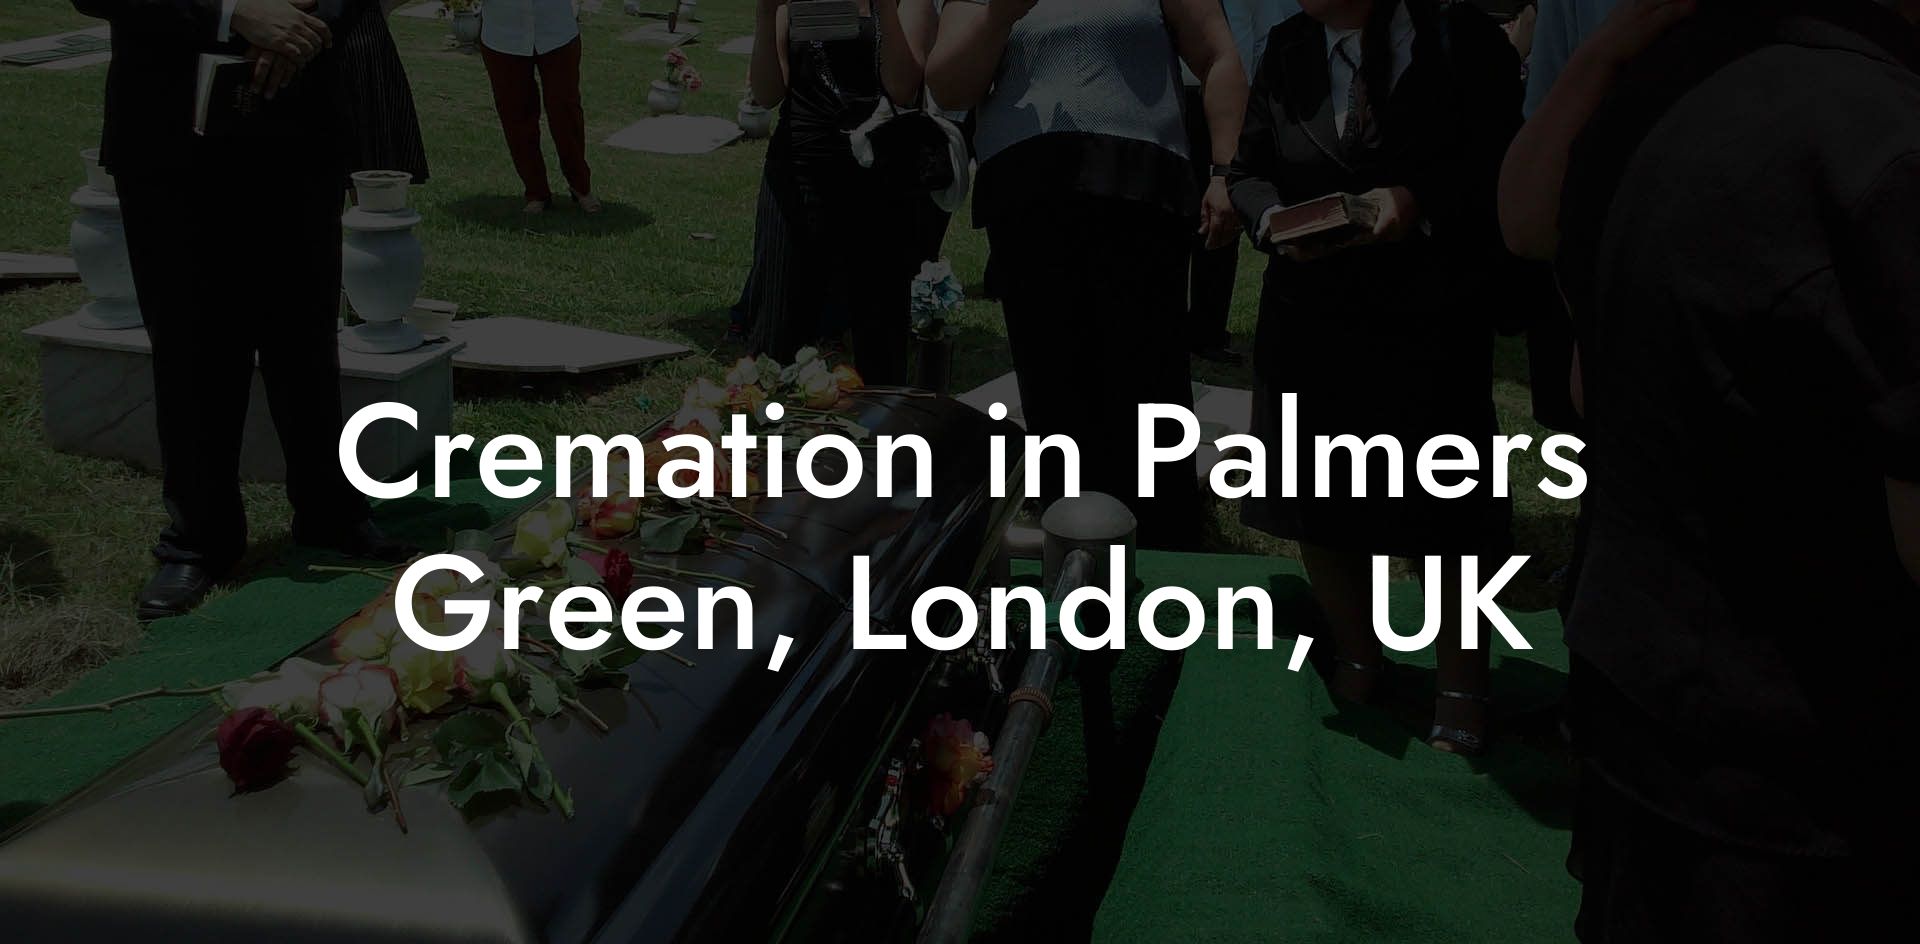 Cremation in Palmers Green, London, UK